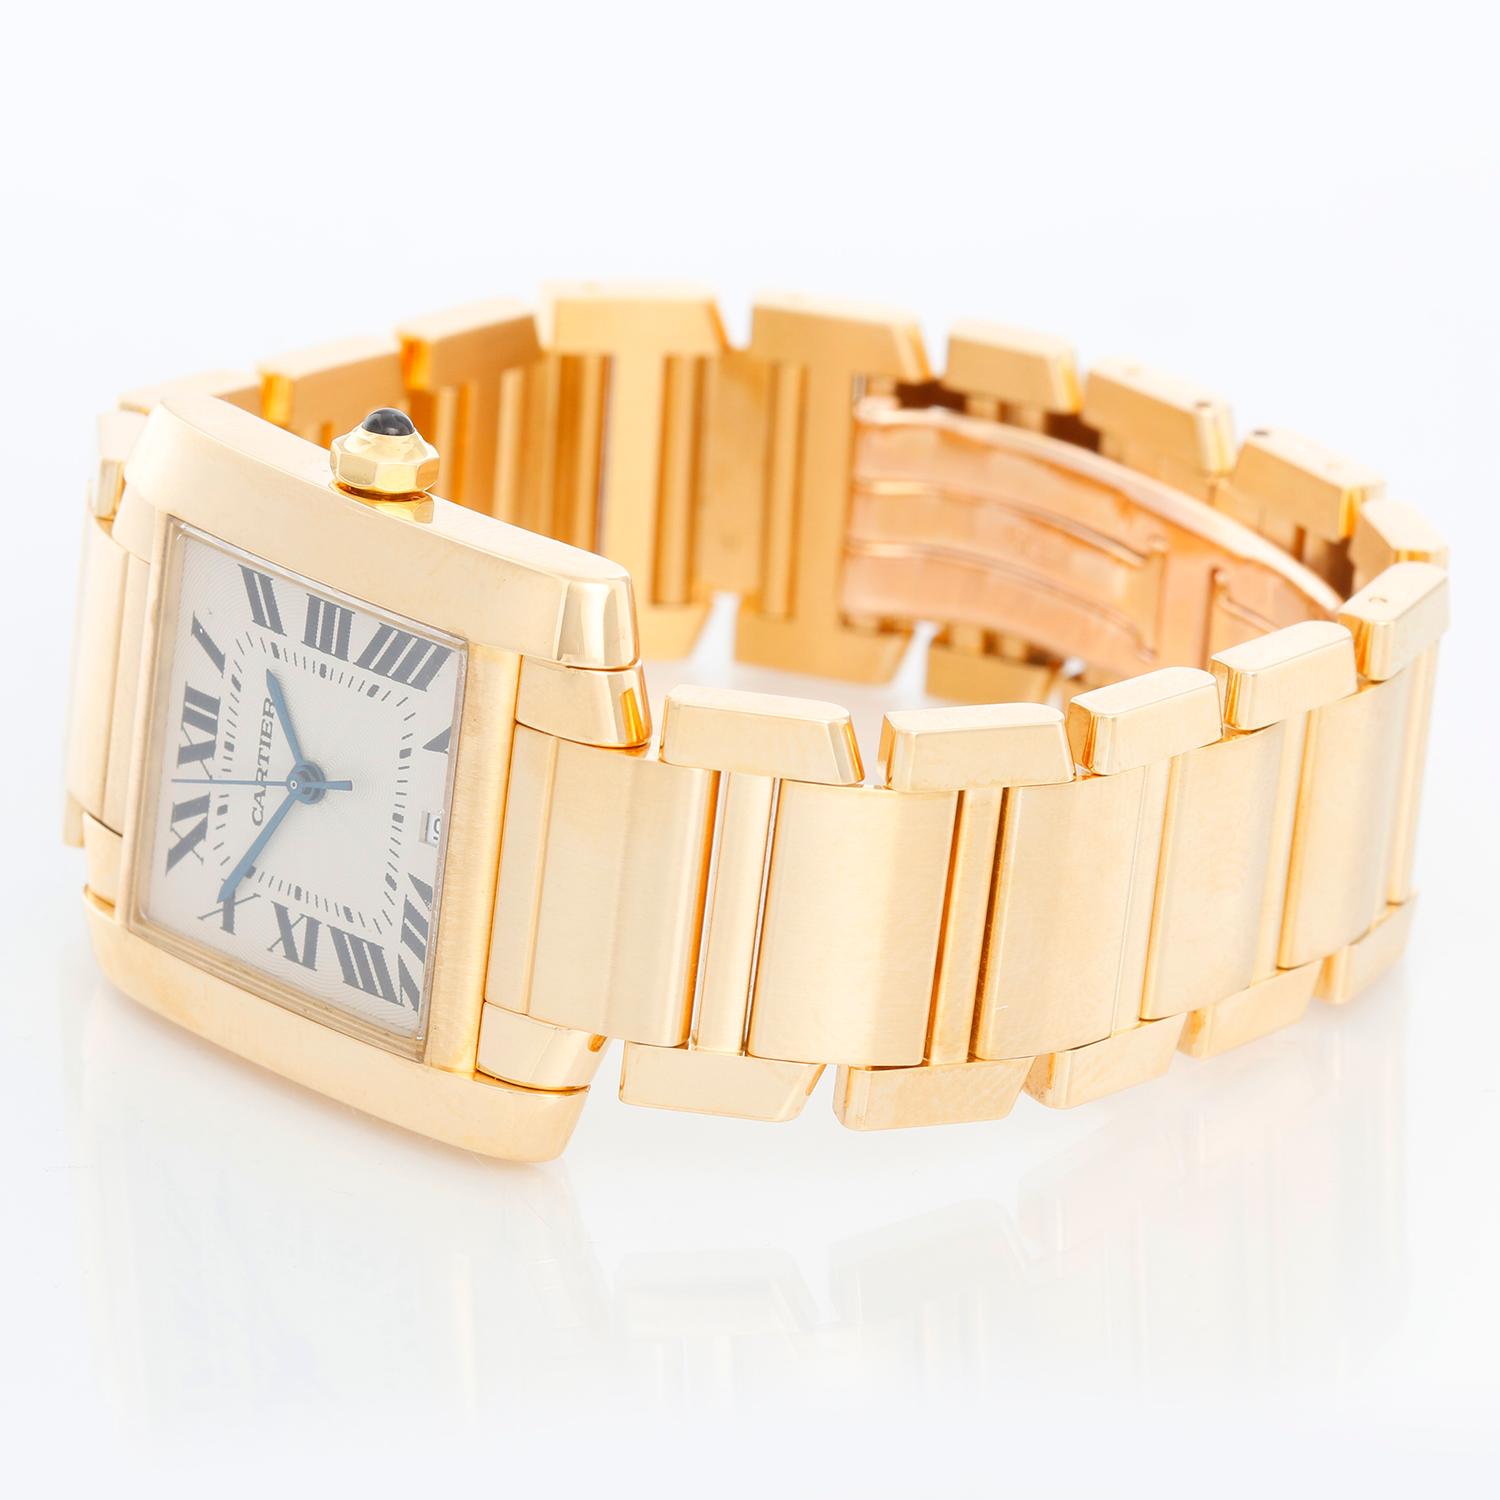 Cartier Tank Francaise 18k Yellow Gold Watch W5000156 1840 - Automatic winding; date. 18k yellow gold case (28mm x 33mm). Silver guilloche dial with black Roman numerals. 18K Yellow gold bracelet. Pre-owned with Cartier box with books. 